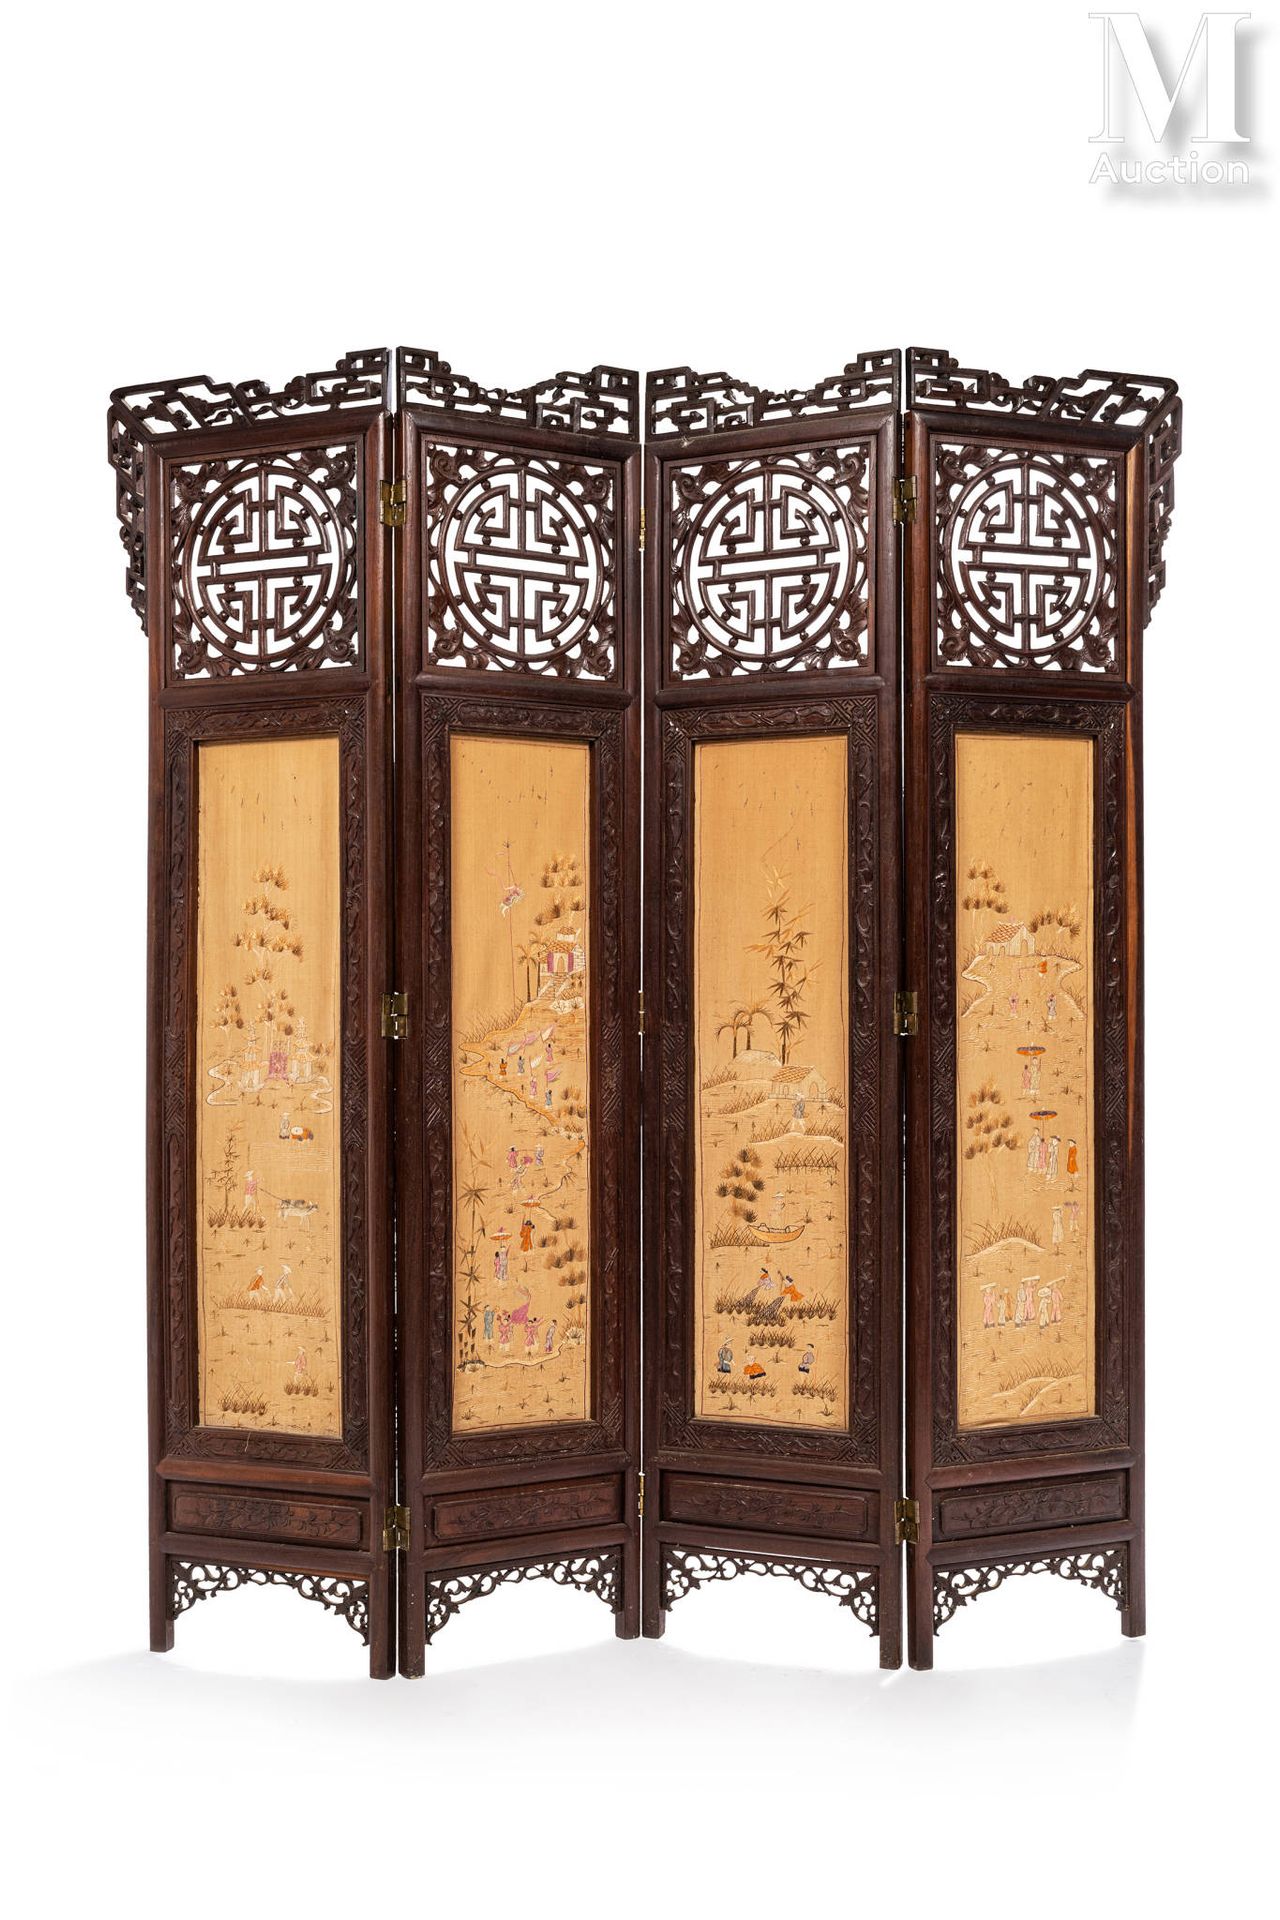 VIETNAM, XXe siècle Four-leaf folding screen

Composed of four panels of embroid&hellip;